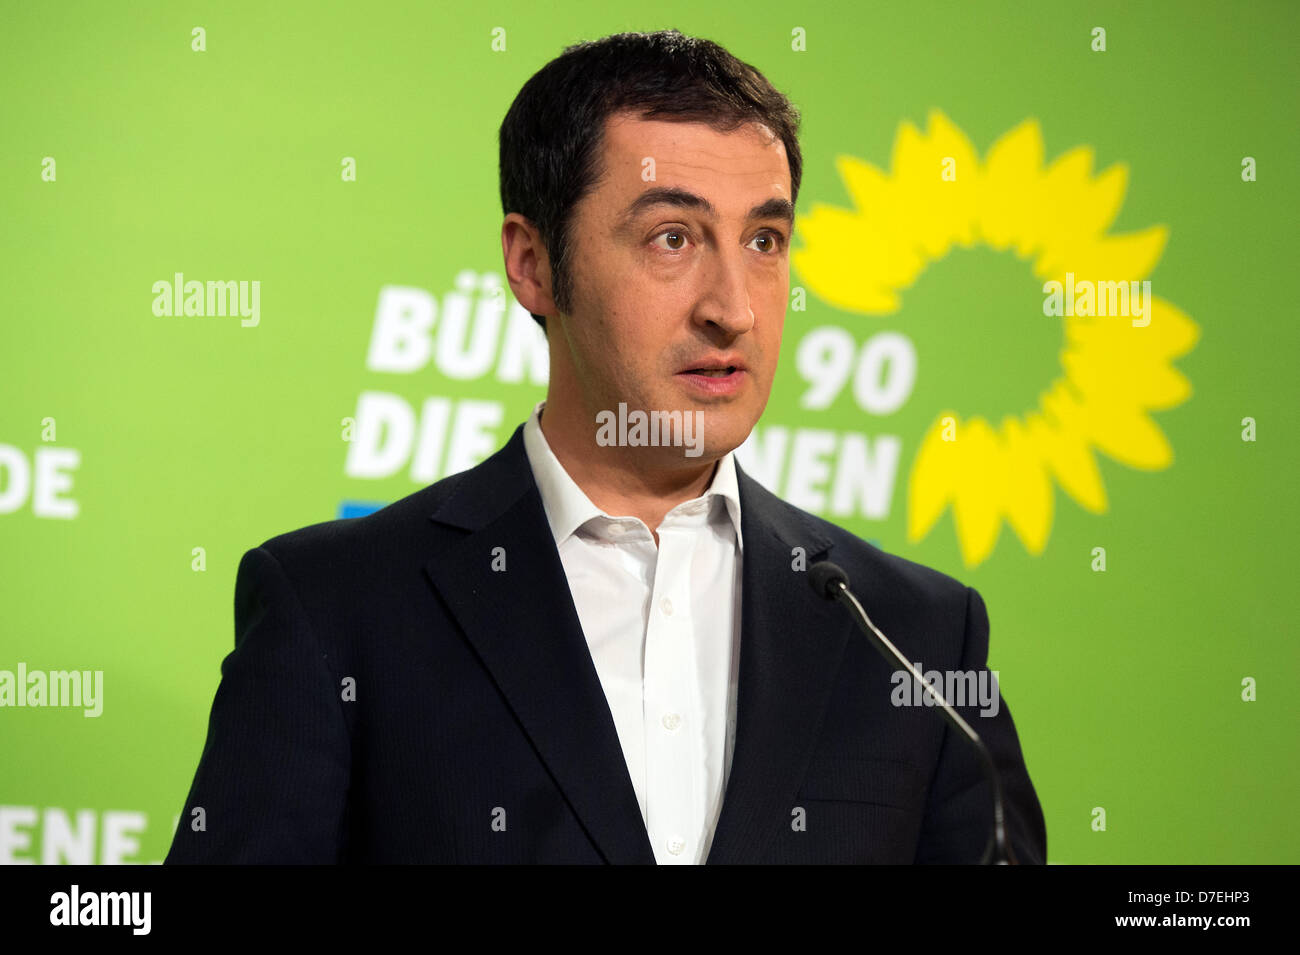 Berlin, Germany. 6th May, 2013. The Chairman of The Greens / Bundnis 90, Cem Özdemir gives a press conference in Berlin. Credit: Credit: Gonçalo Silva/Alamy Live News. Stock Photo